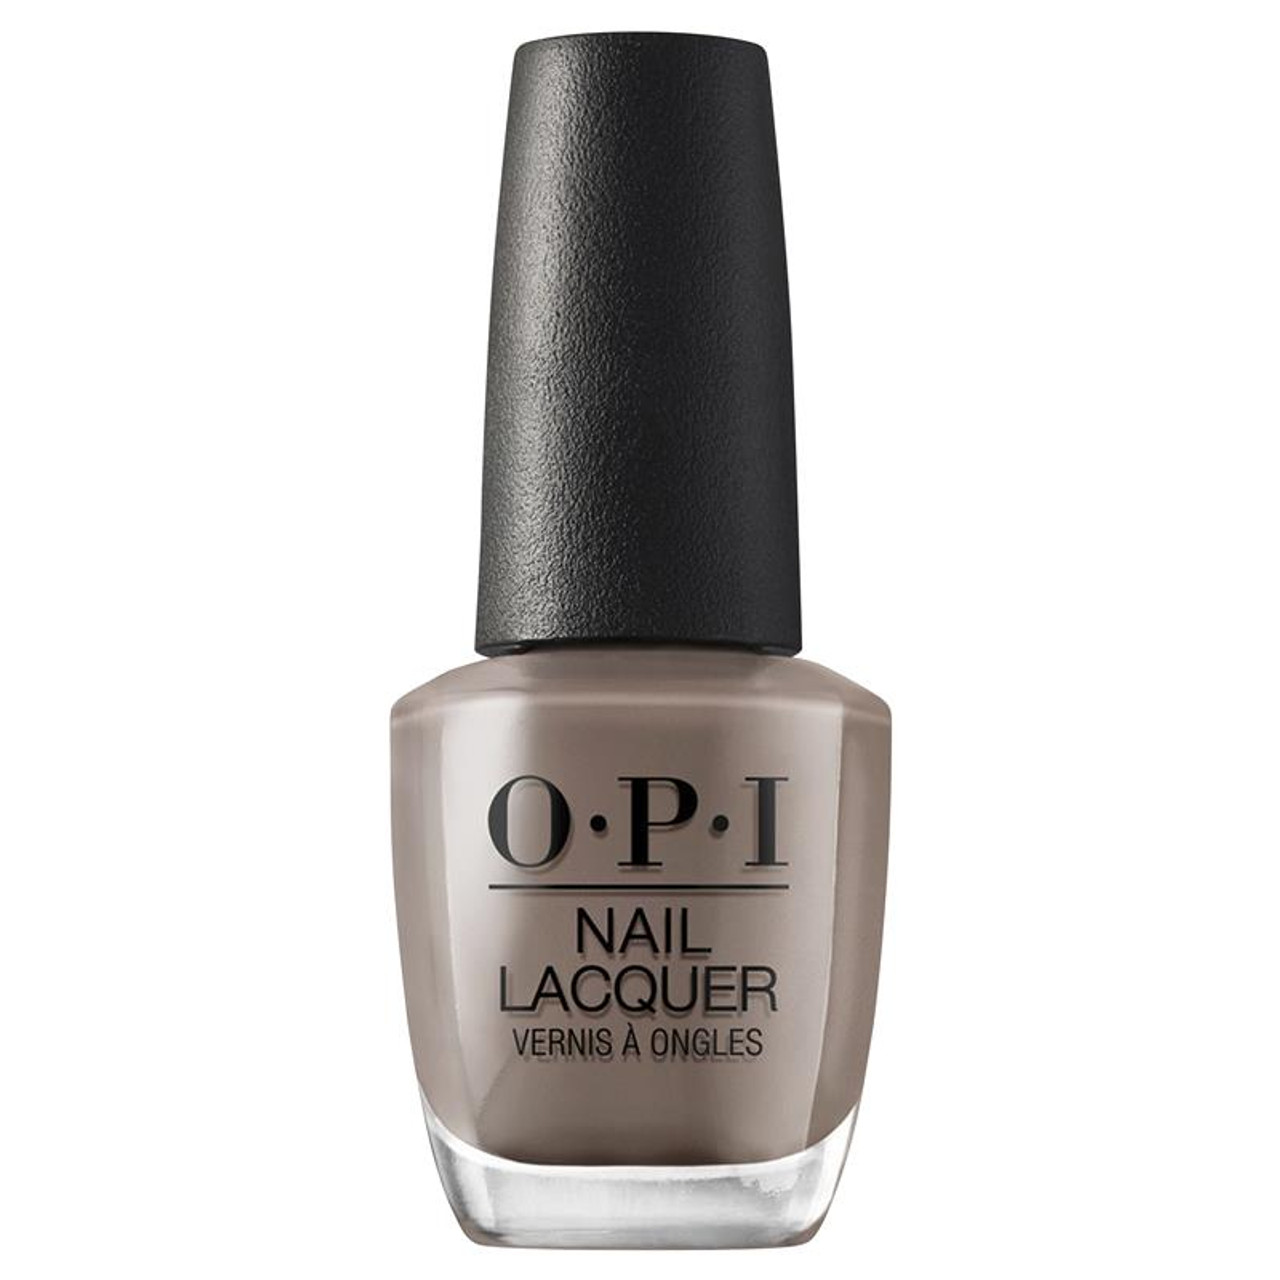 OPI Nail Lacquer Review - Beauty Review